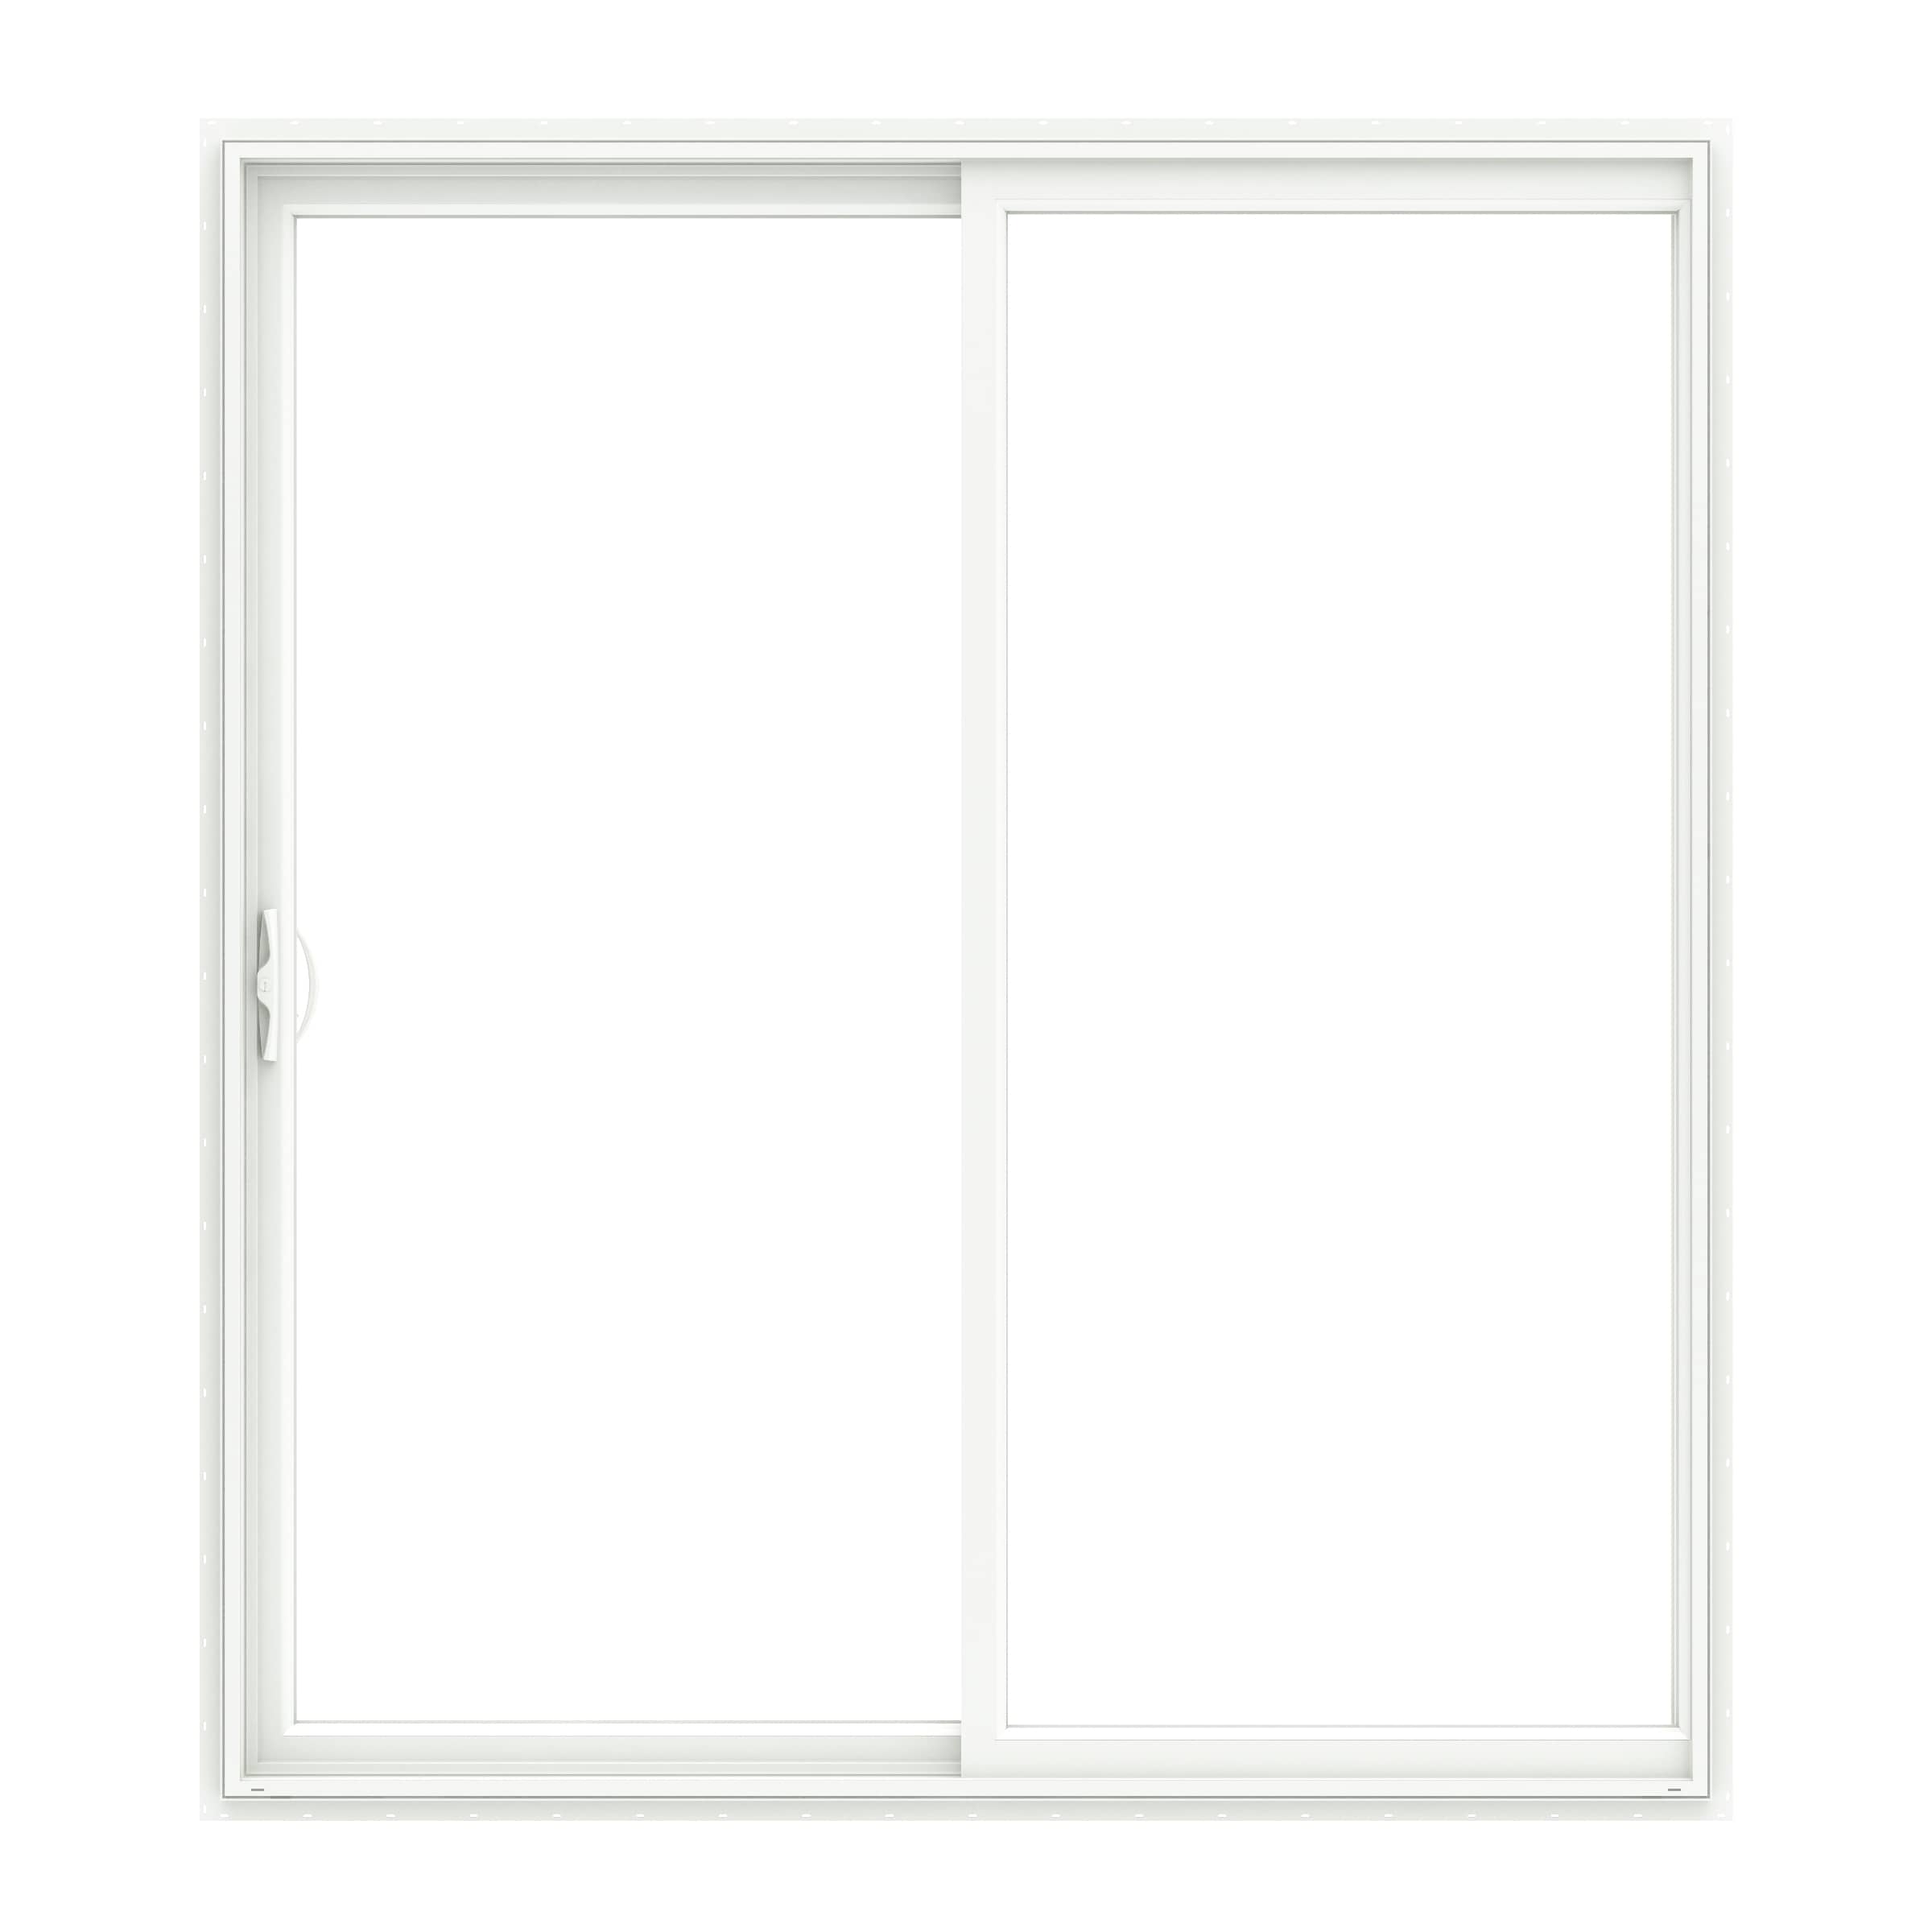 Patio Doors At Lowes.Com